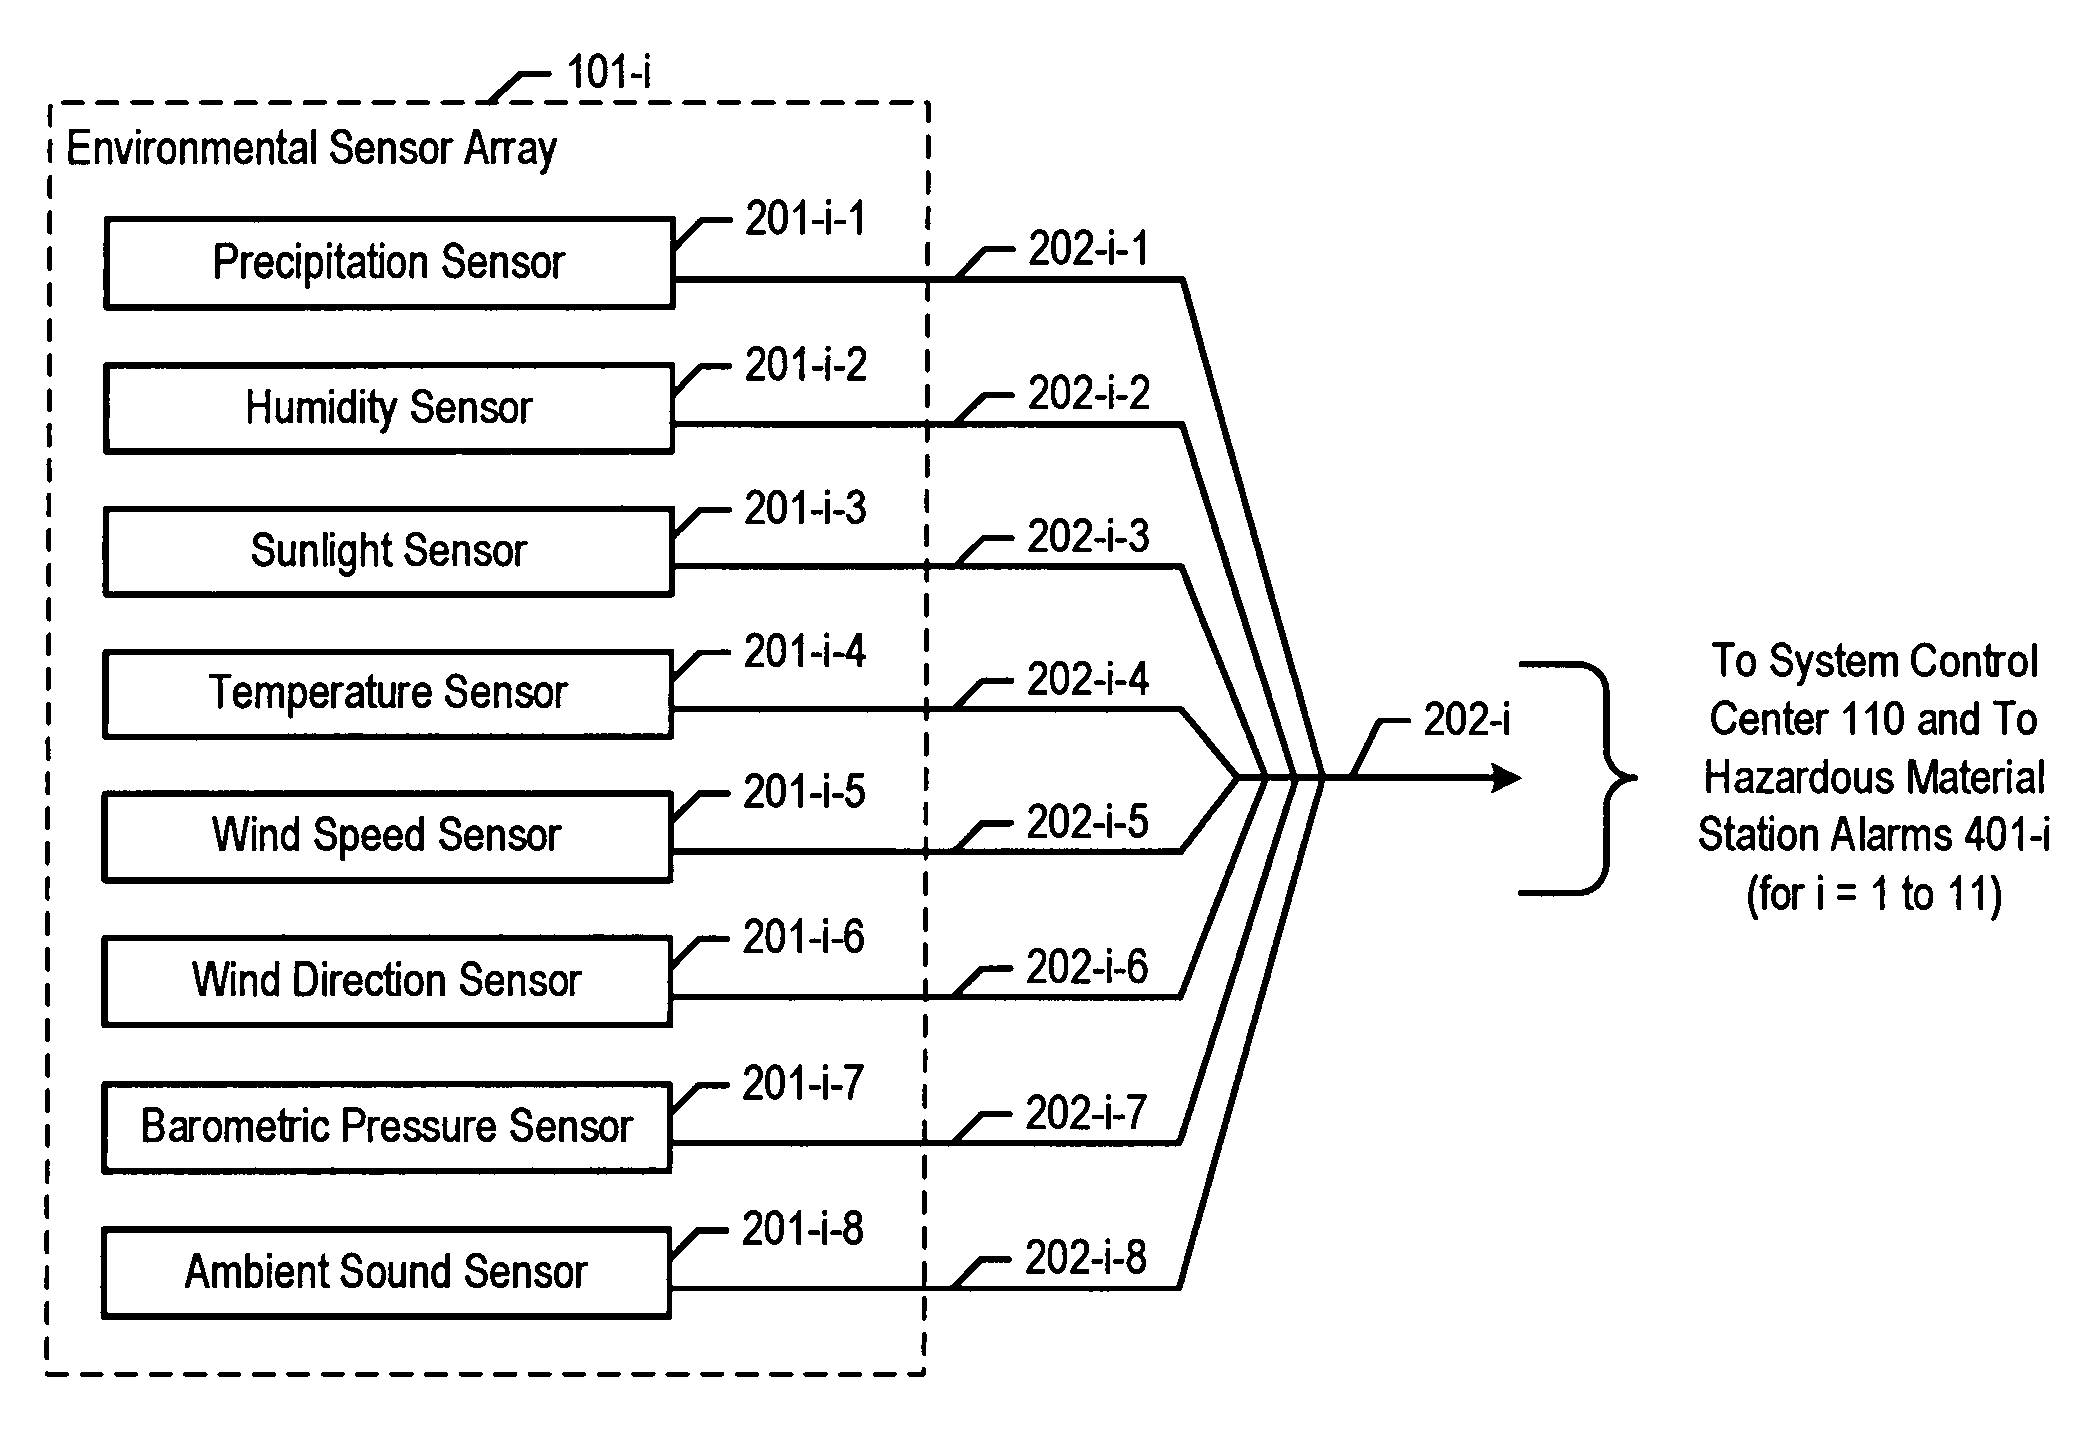 Chemical, biological, radiological, and nuclear weapon detection system comprising array of spatially-disparate sensors and surveillance equipment